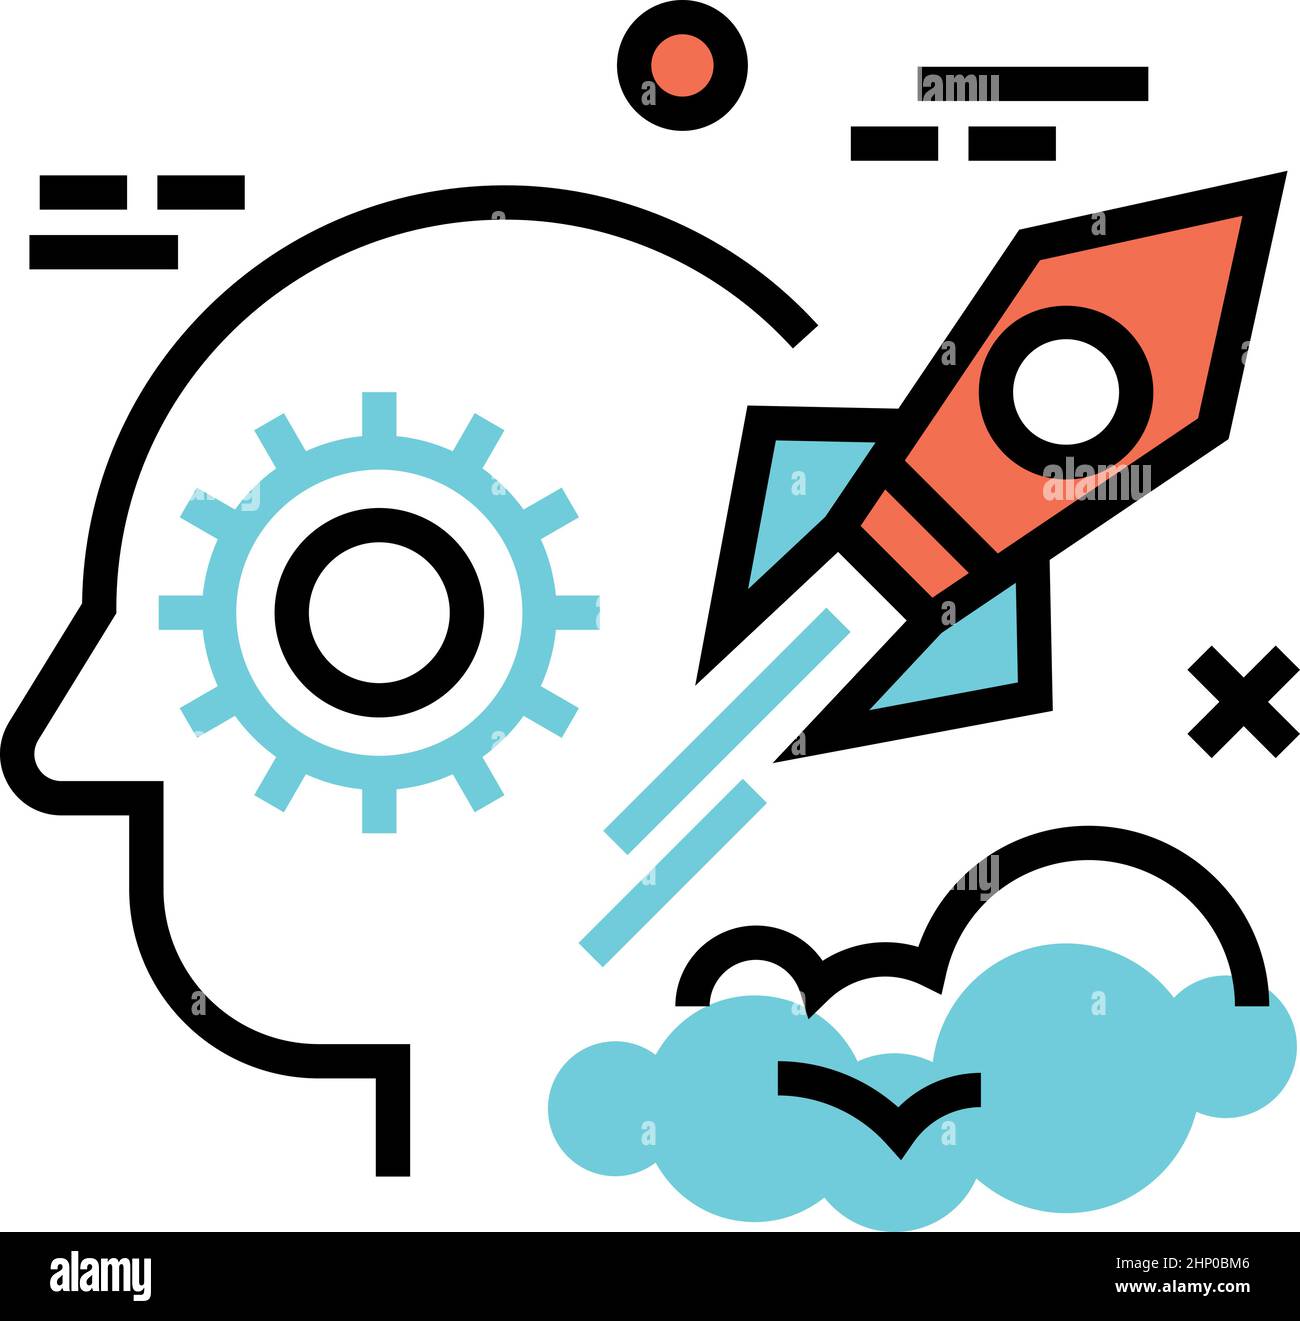 Head with gear and rocket. Big idea thinking process concept. Stock Vector